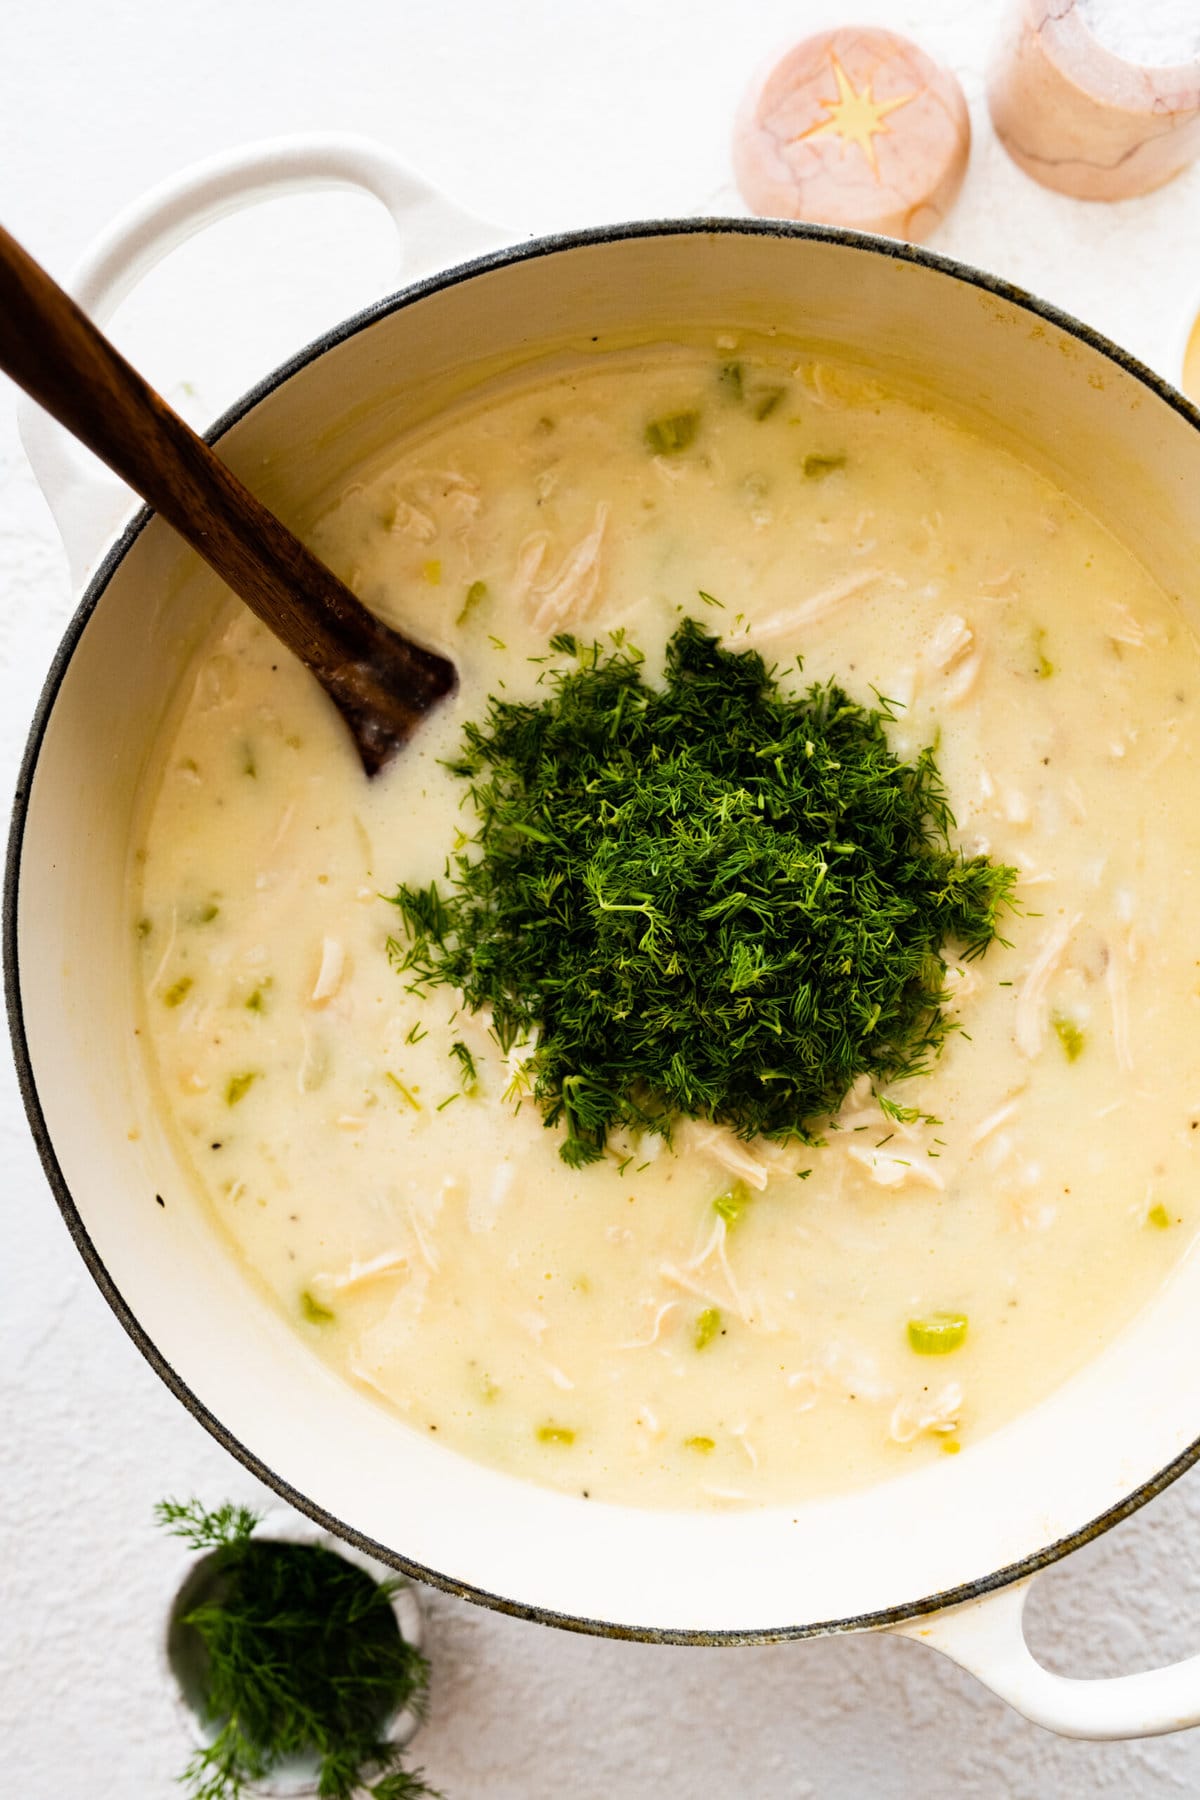 How to make best avgolemono soup step-by-step: add fresh herbs.